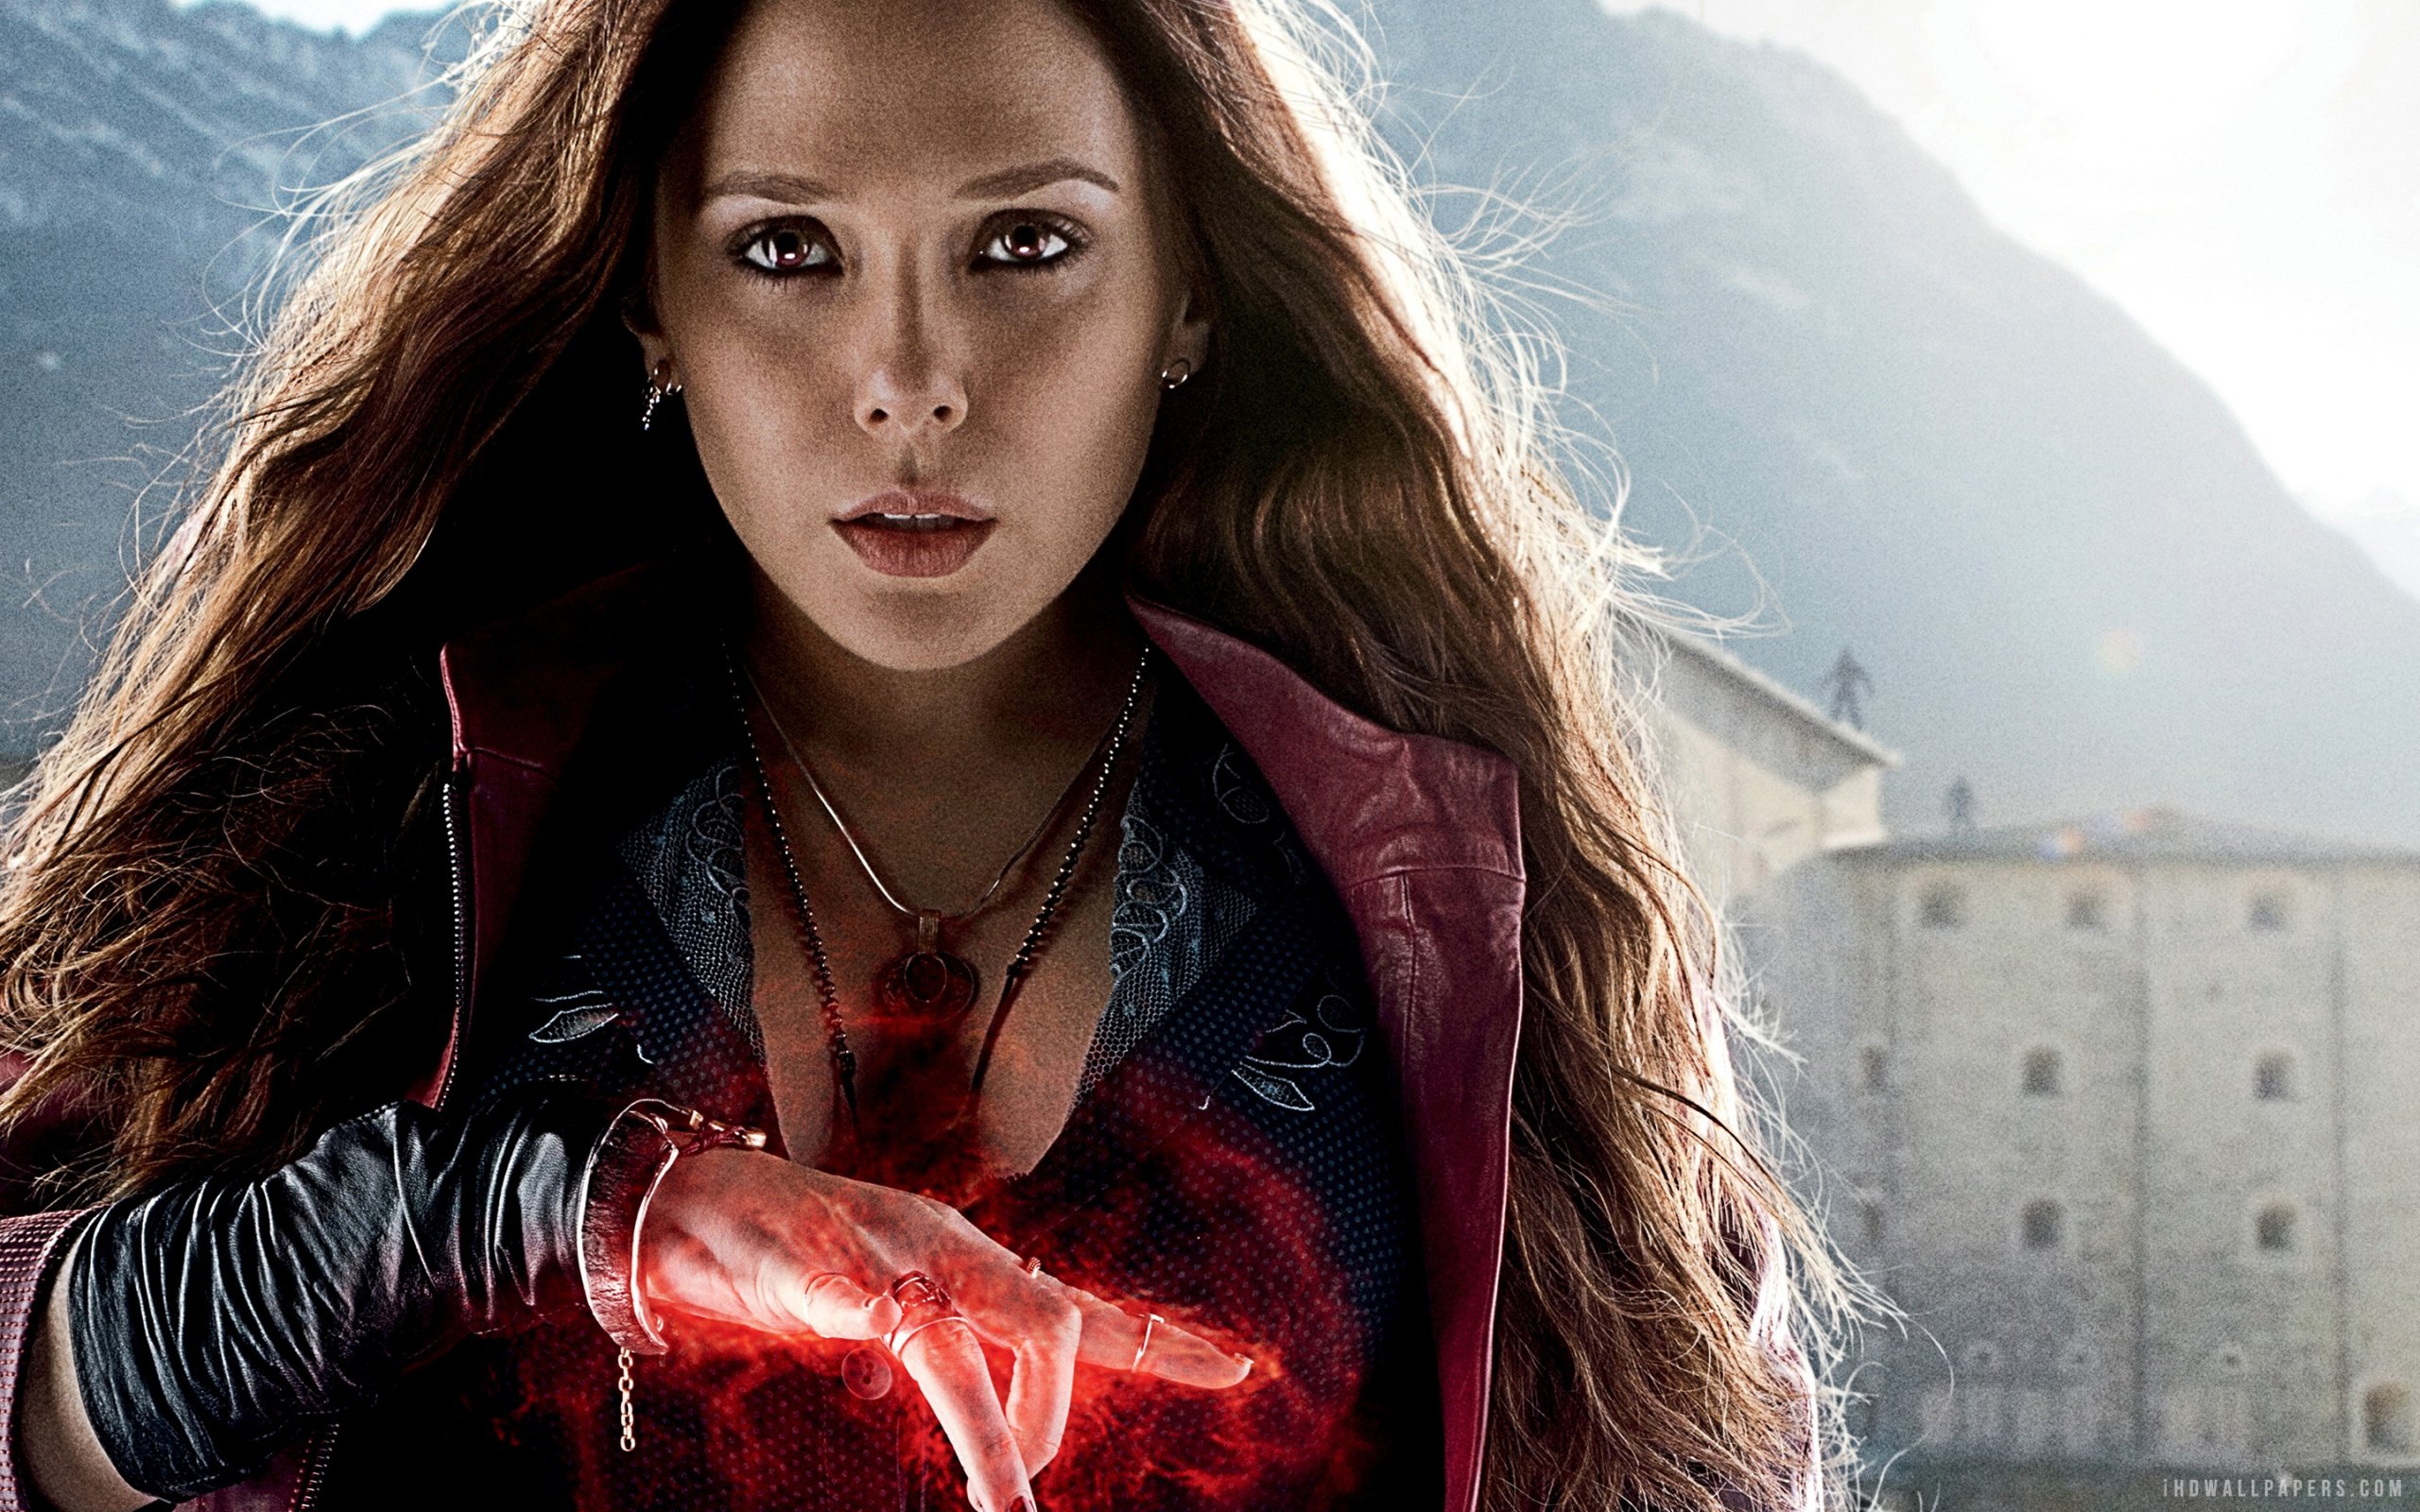 Scarlet Witch Avengers Age of Ultron HD Wallpaper iHD Wallpapers